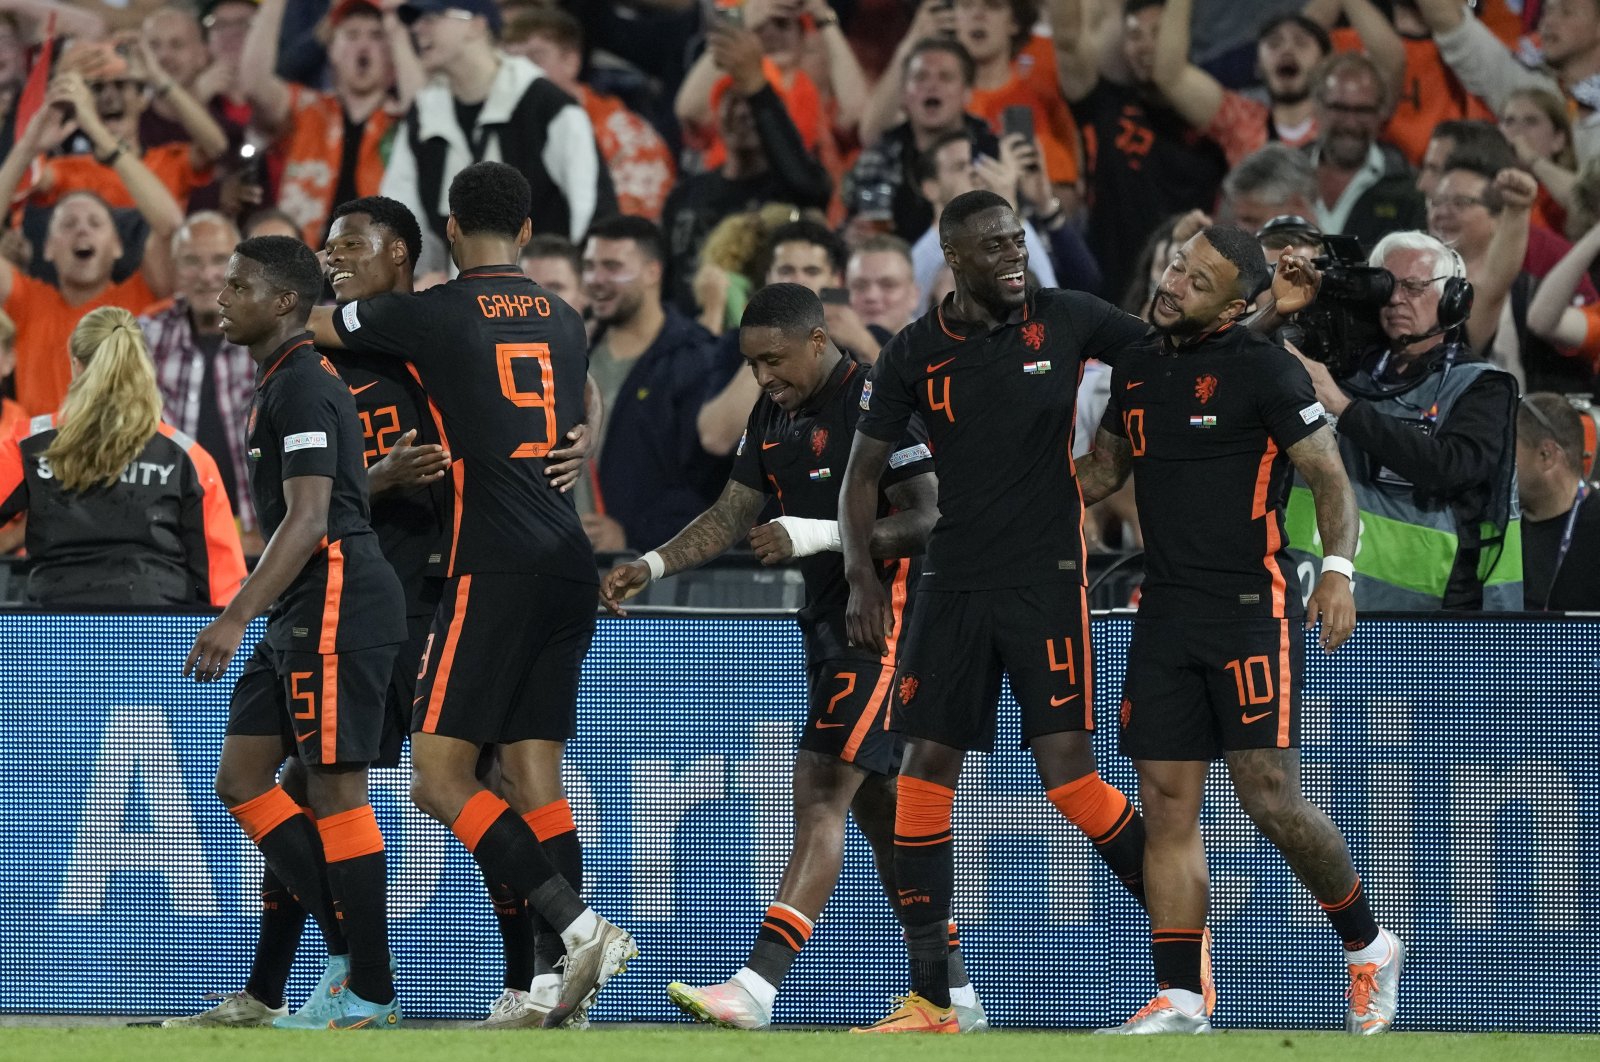 Dutch players celebrate a goal in a Nations League match against Wales, Rotterdam, Netherlands, June 14, 2022. (AP Photo)